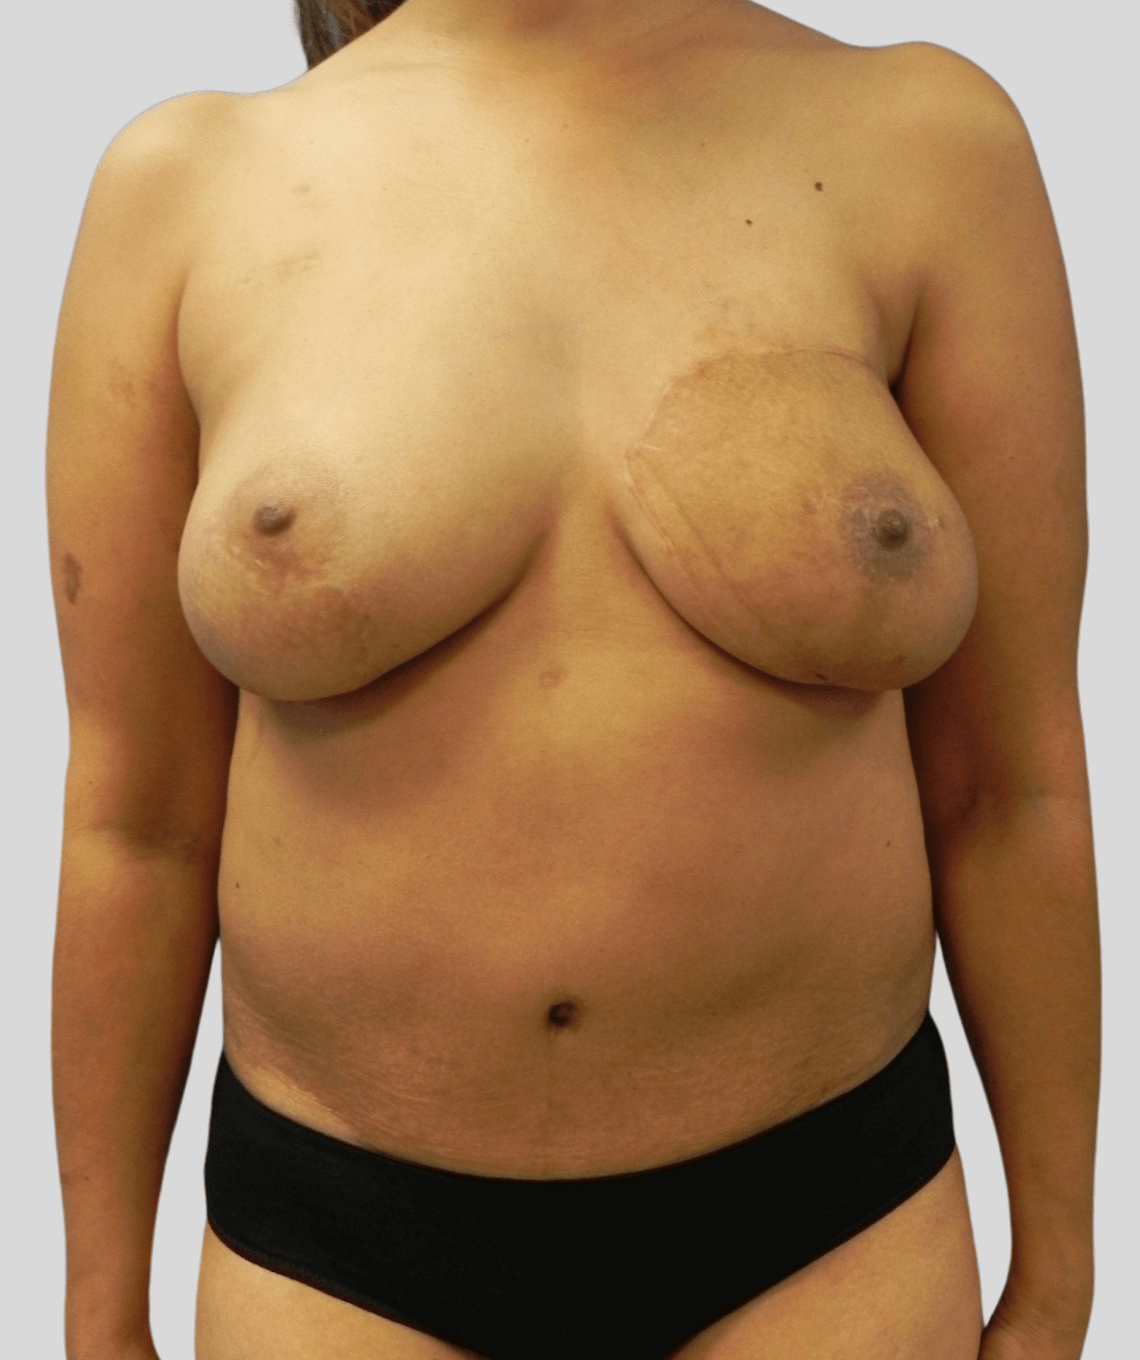 diep flap- before and after photos - after - prma plastic surgery - case 4